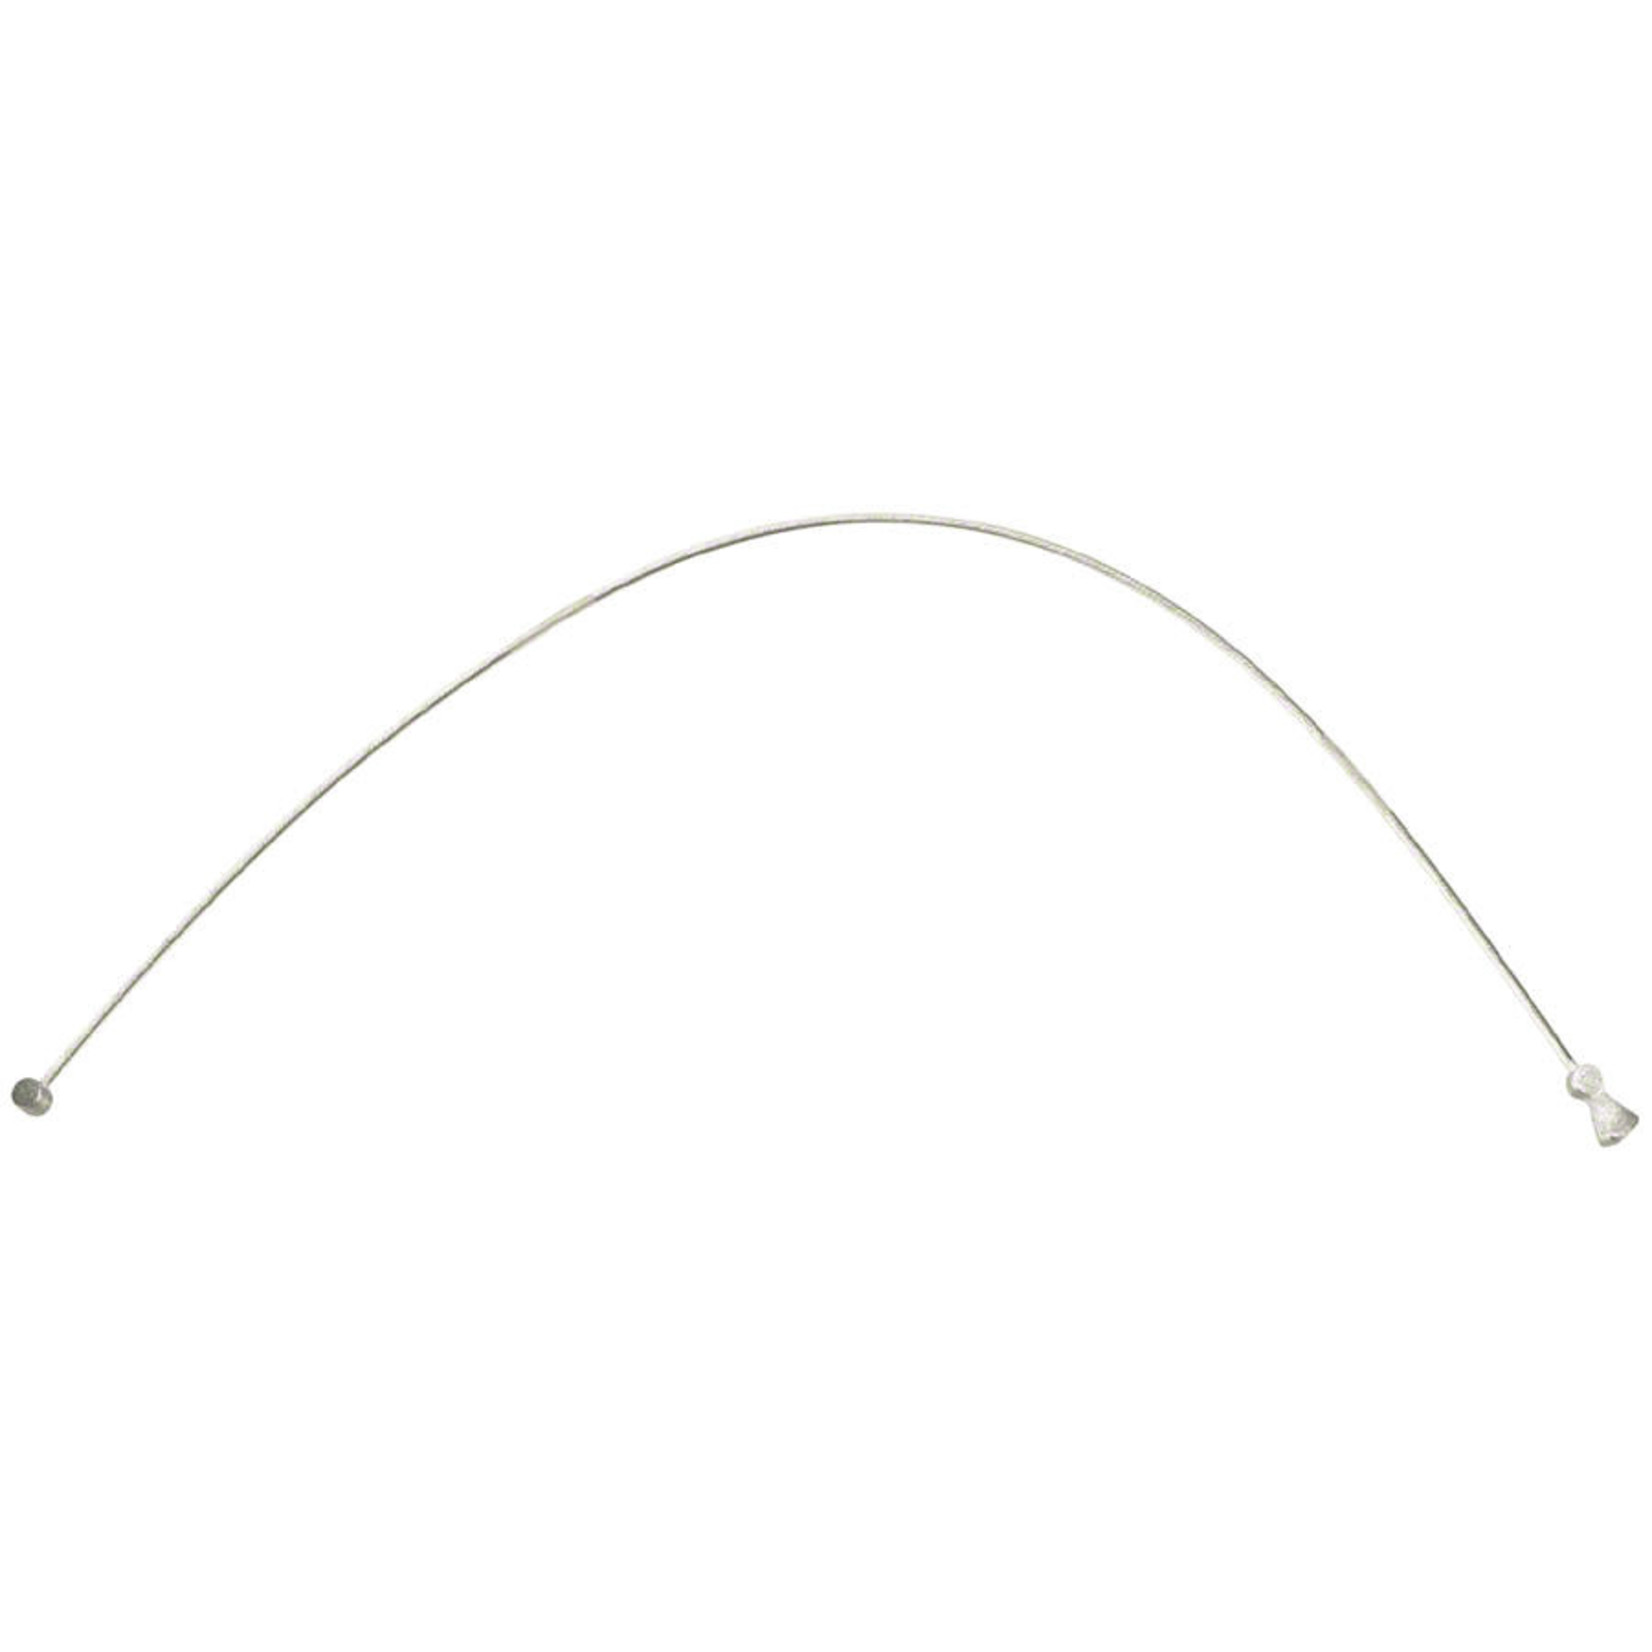 Jagwire Jagwire Double-Ended Straddle Wire 1.8mm x 380mm, Each